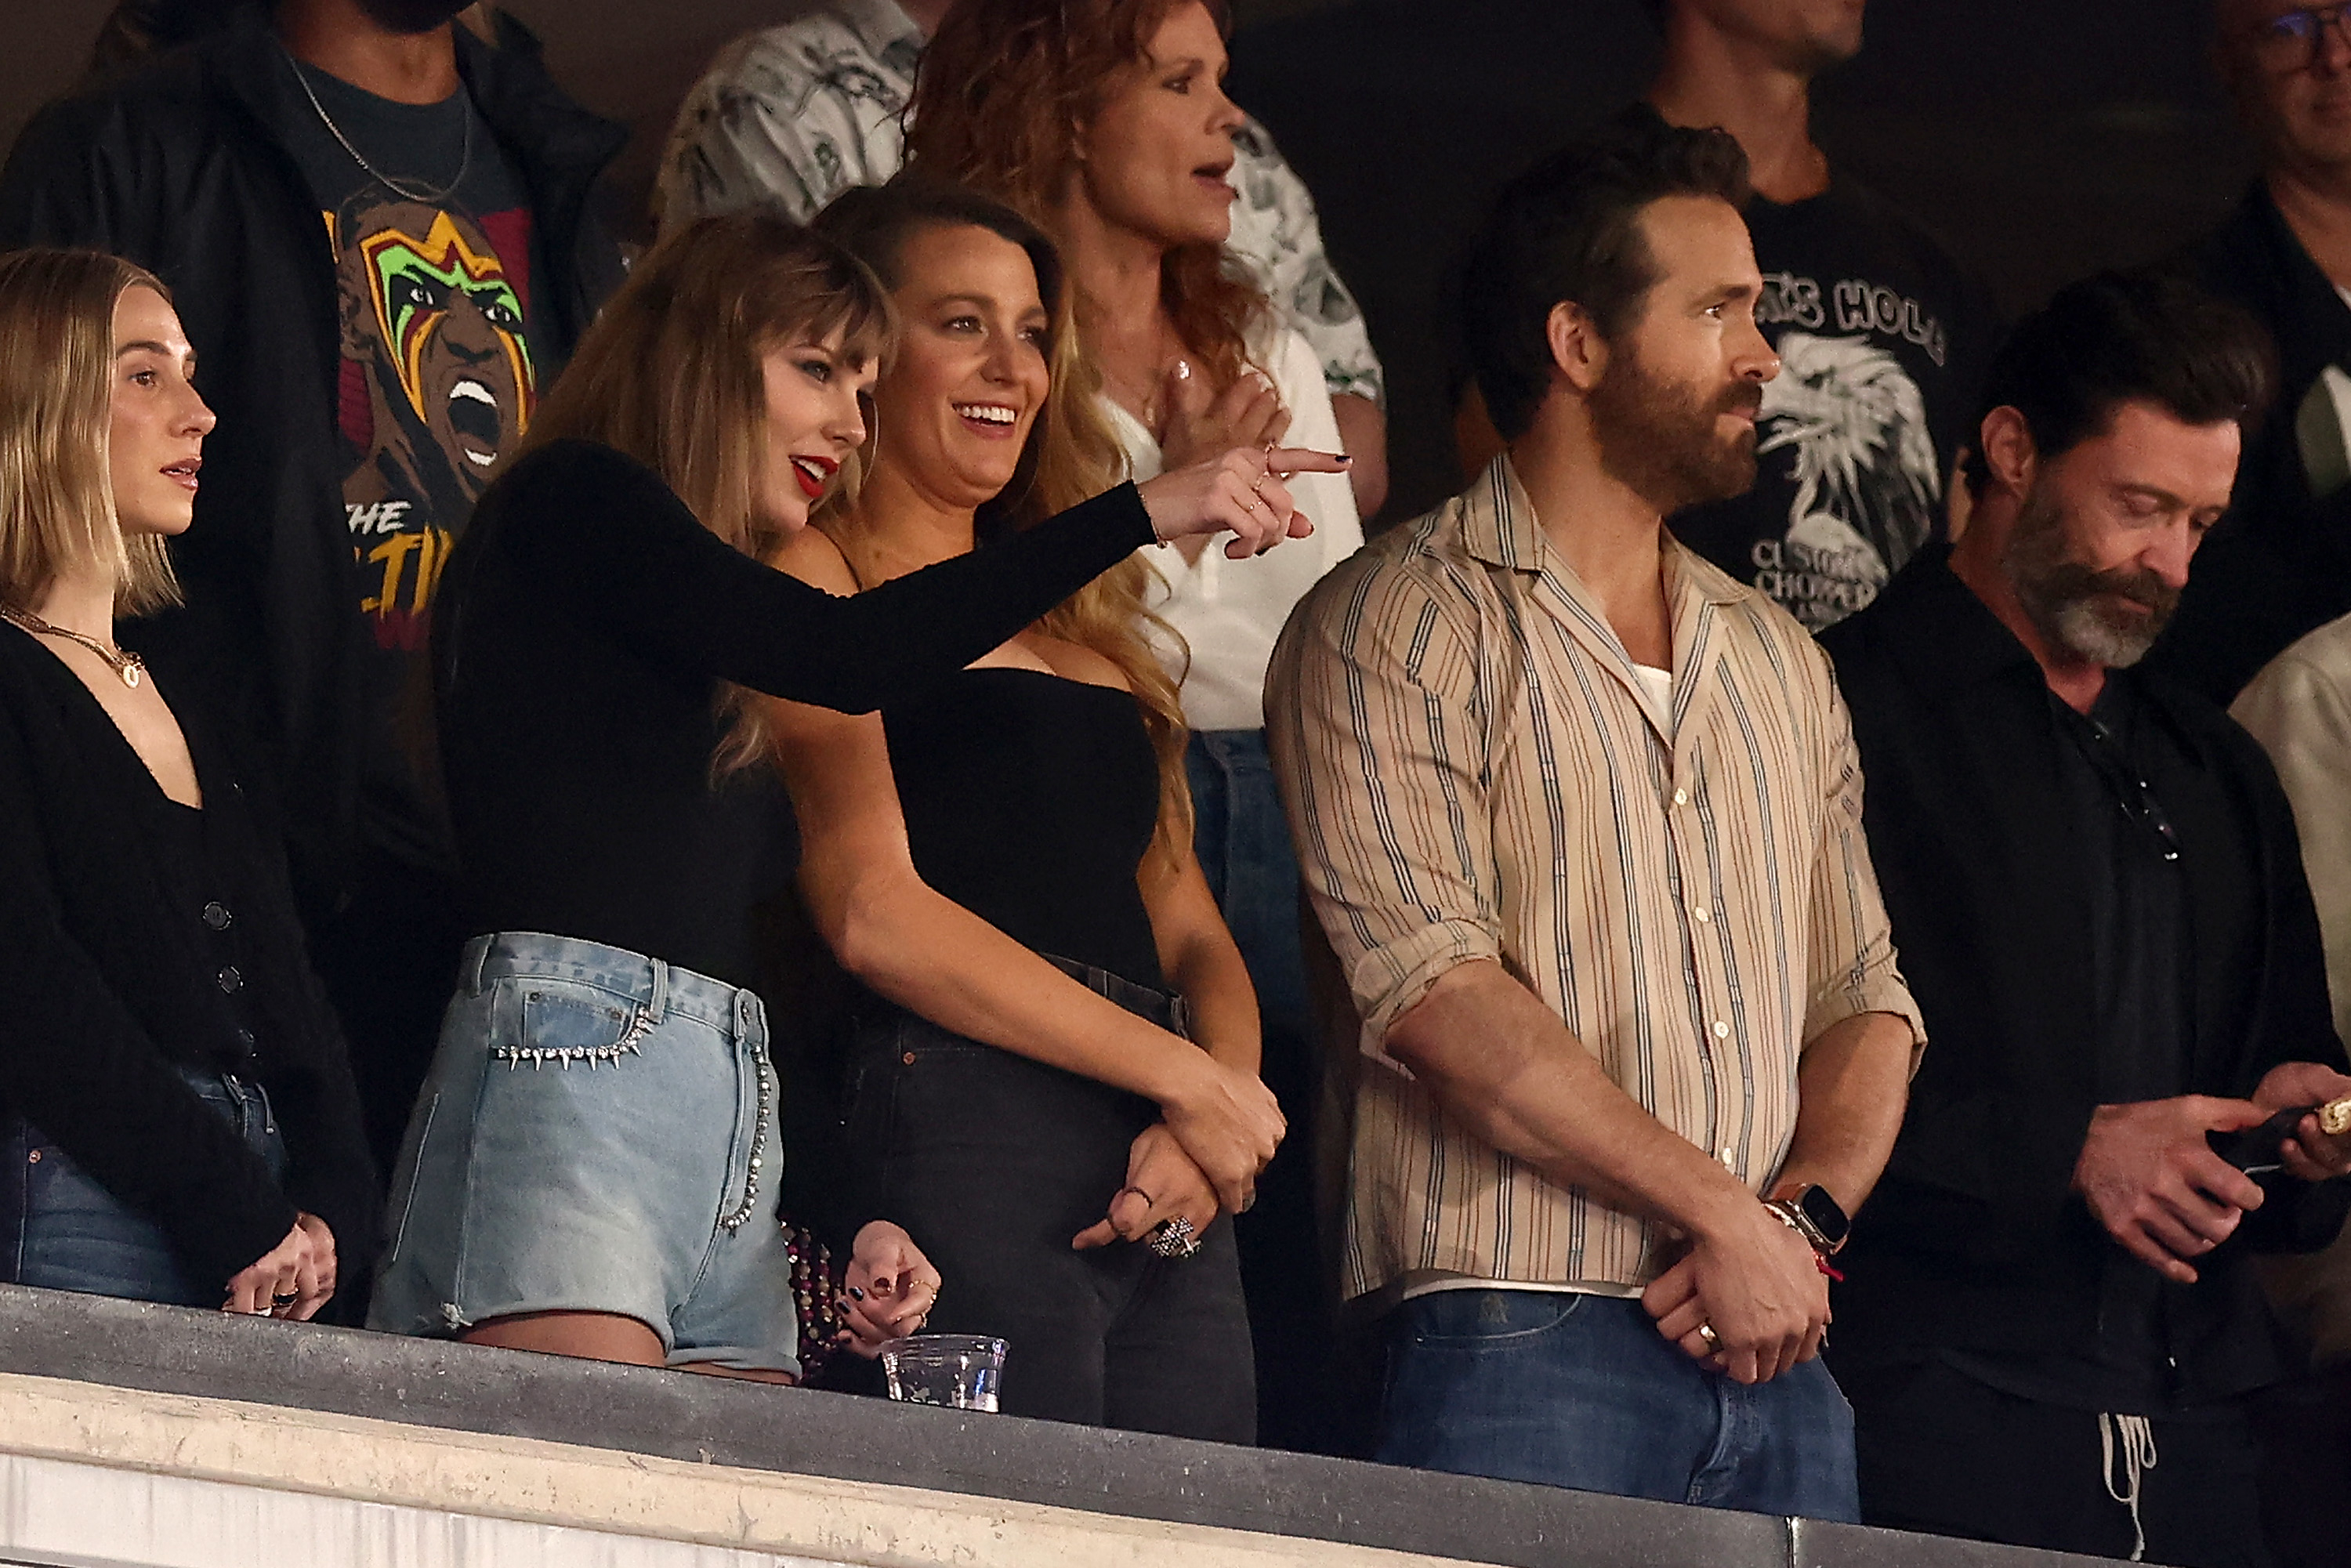 taylor leaning into blake lively and pointing to the field